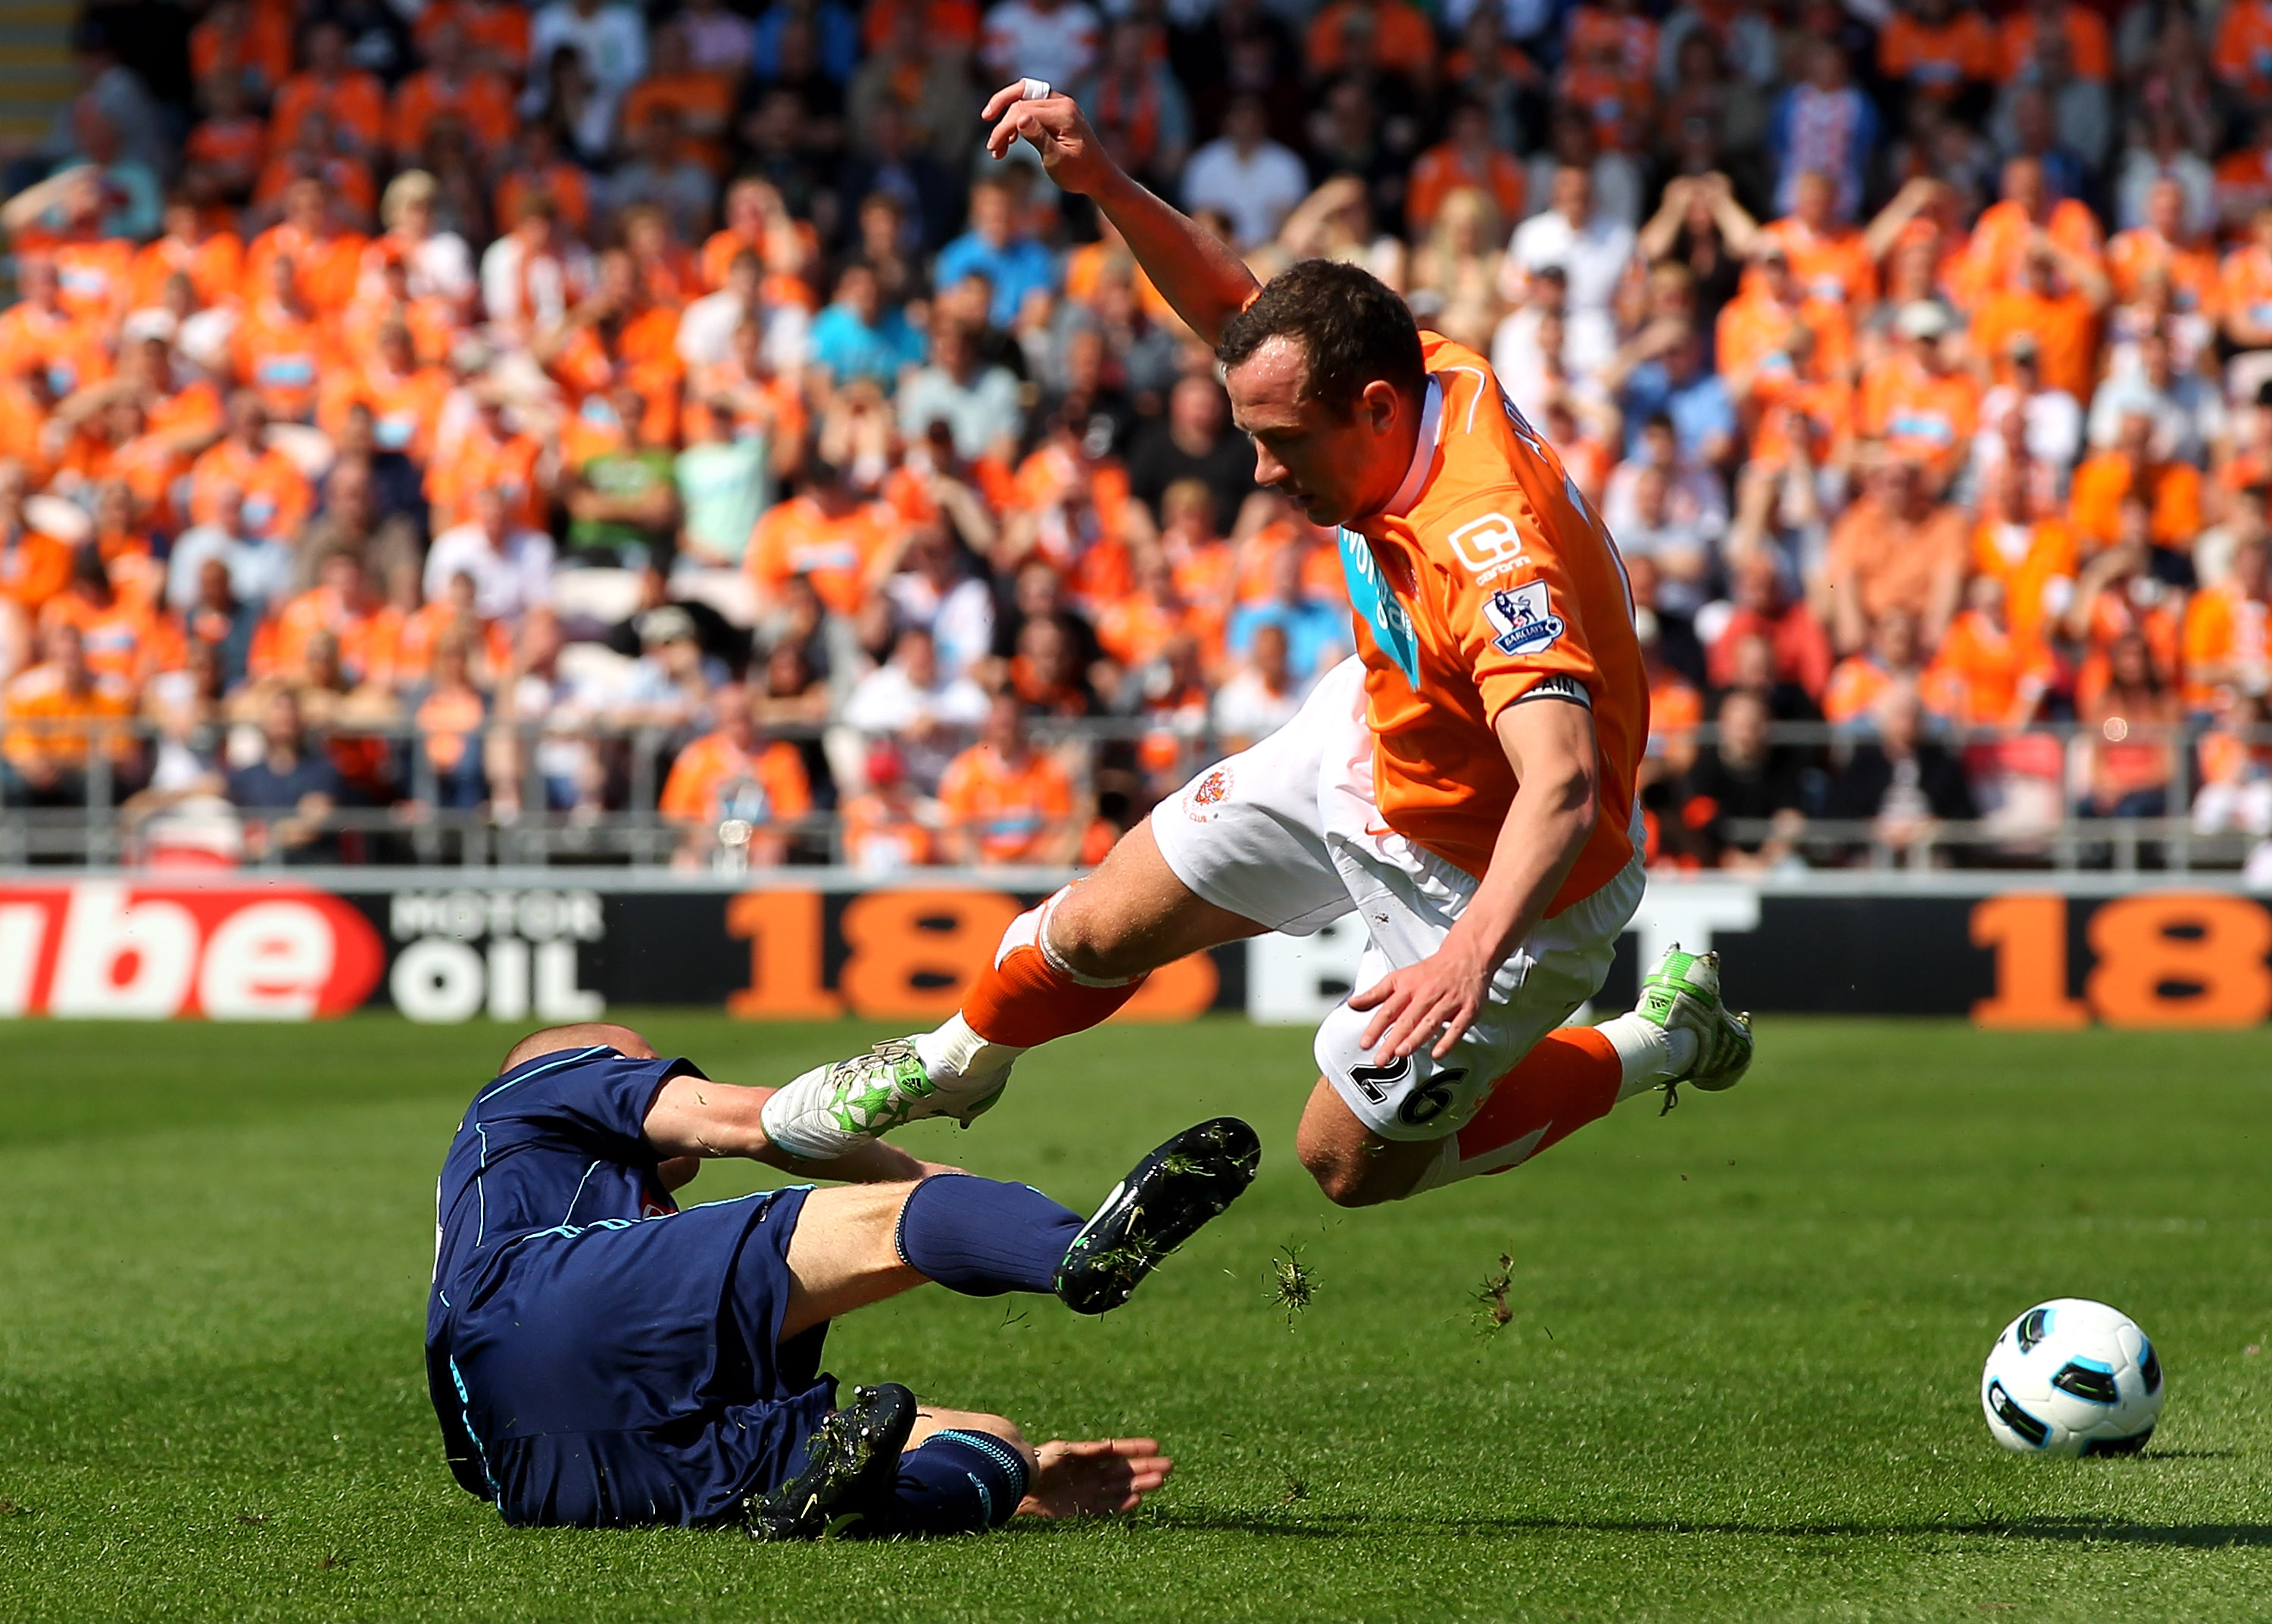 BLACKPOOL, ENGLAND - APRIL 30:   Andy Wilkinson of Stoke City challenges Charlie Adam of Blackpool during the Barclays Premier League match between Blackpool and Stoke City at Bloomfield Road on April 30, 2011 in Blackpool, England. (Photo by Clive Brunsk